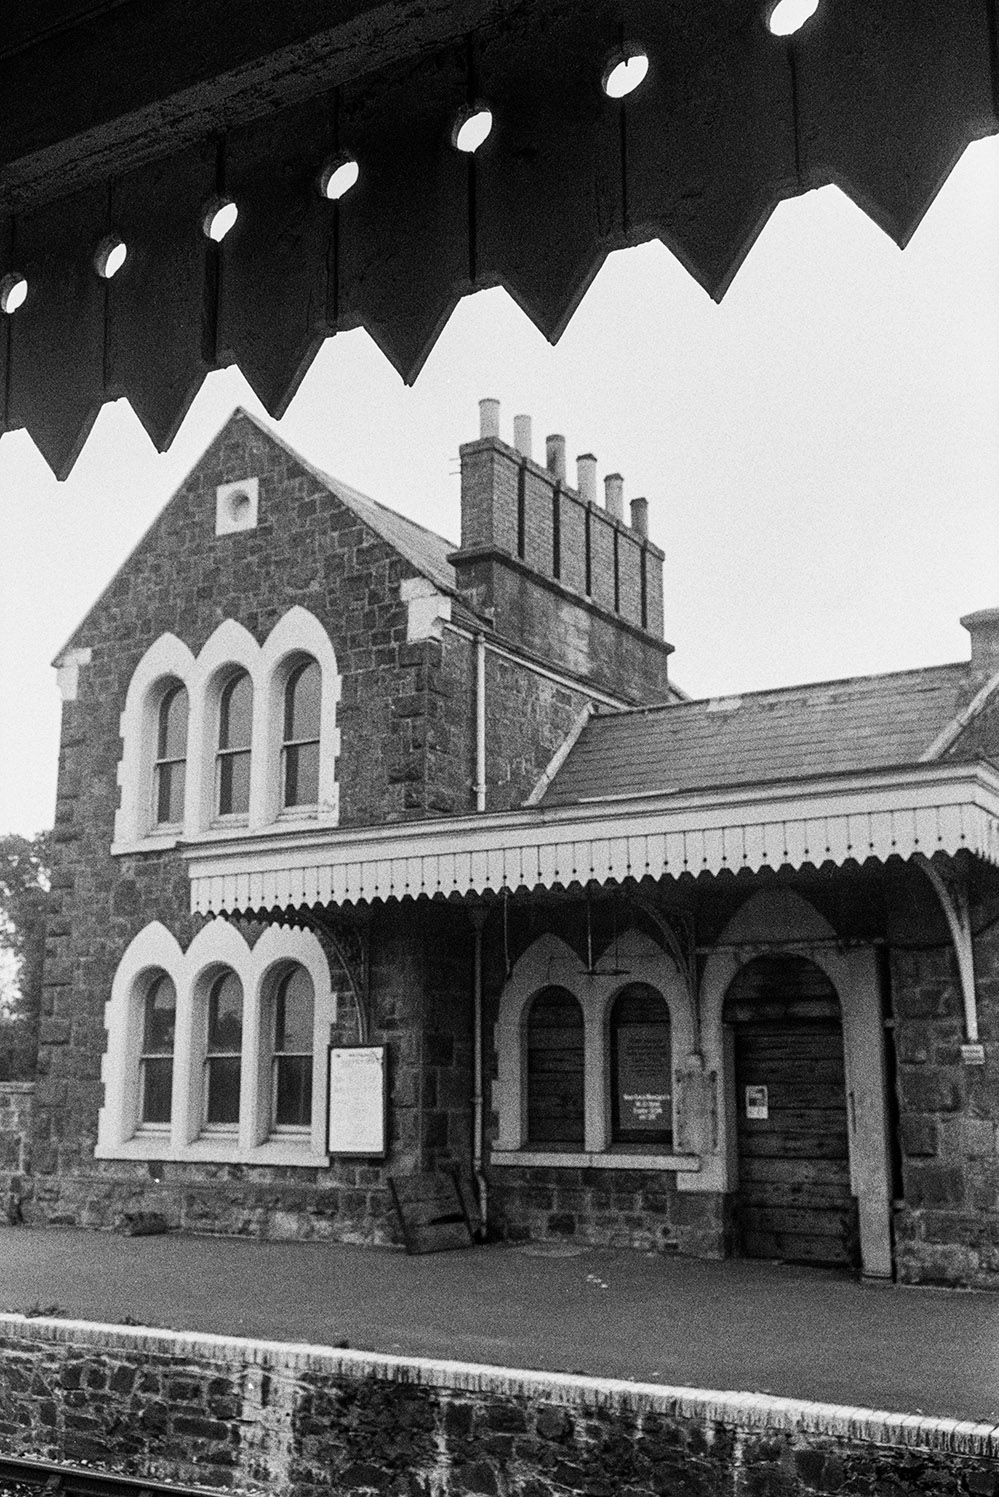 The main station building with arched windows at Bow Railway Station. The image is taken from the opposite platform.